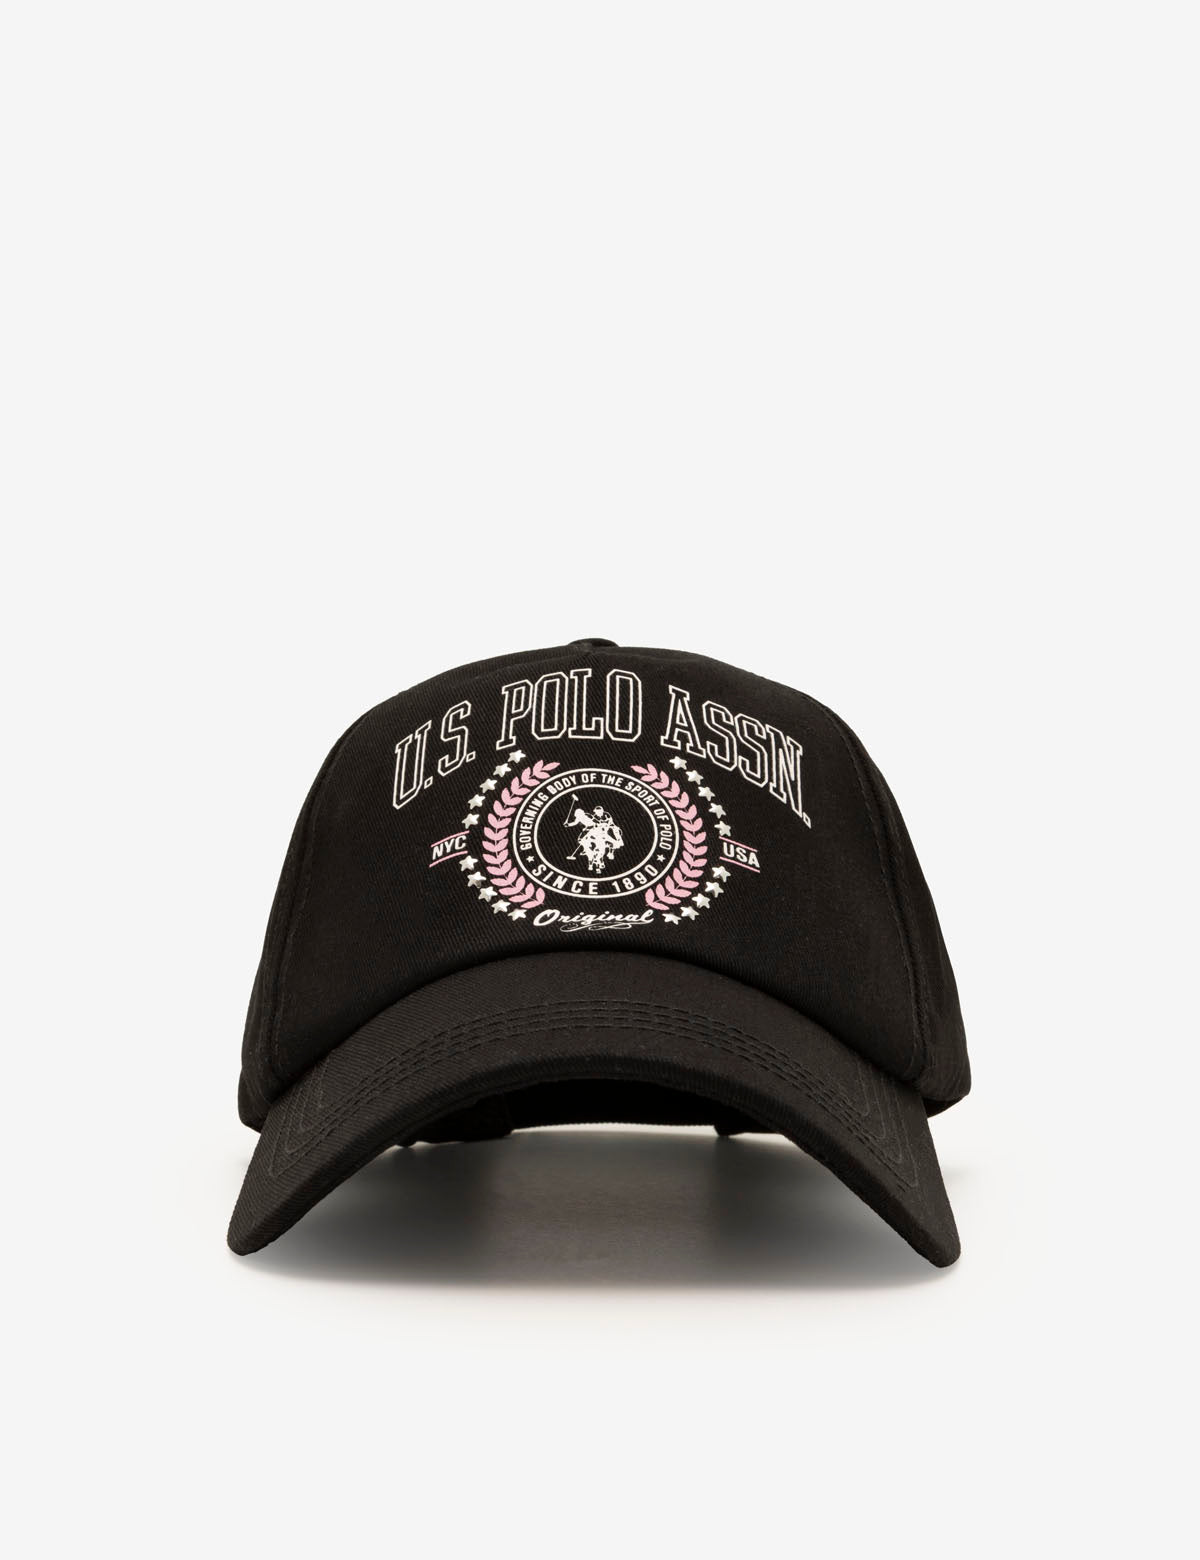 WOMENS EMBELLISHED CREST HAT U.S. POLO ASSN.